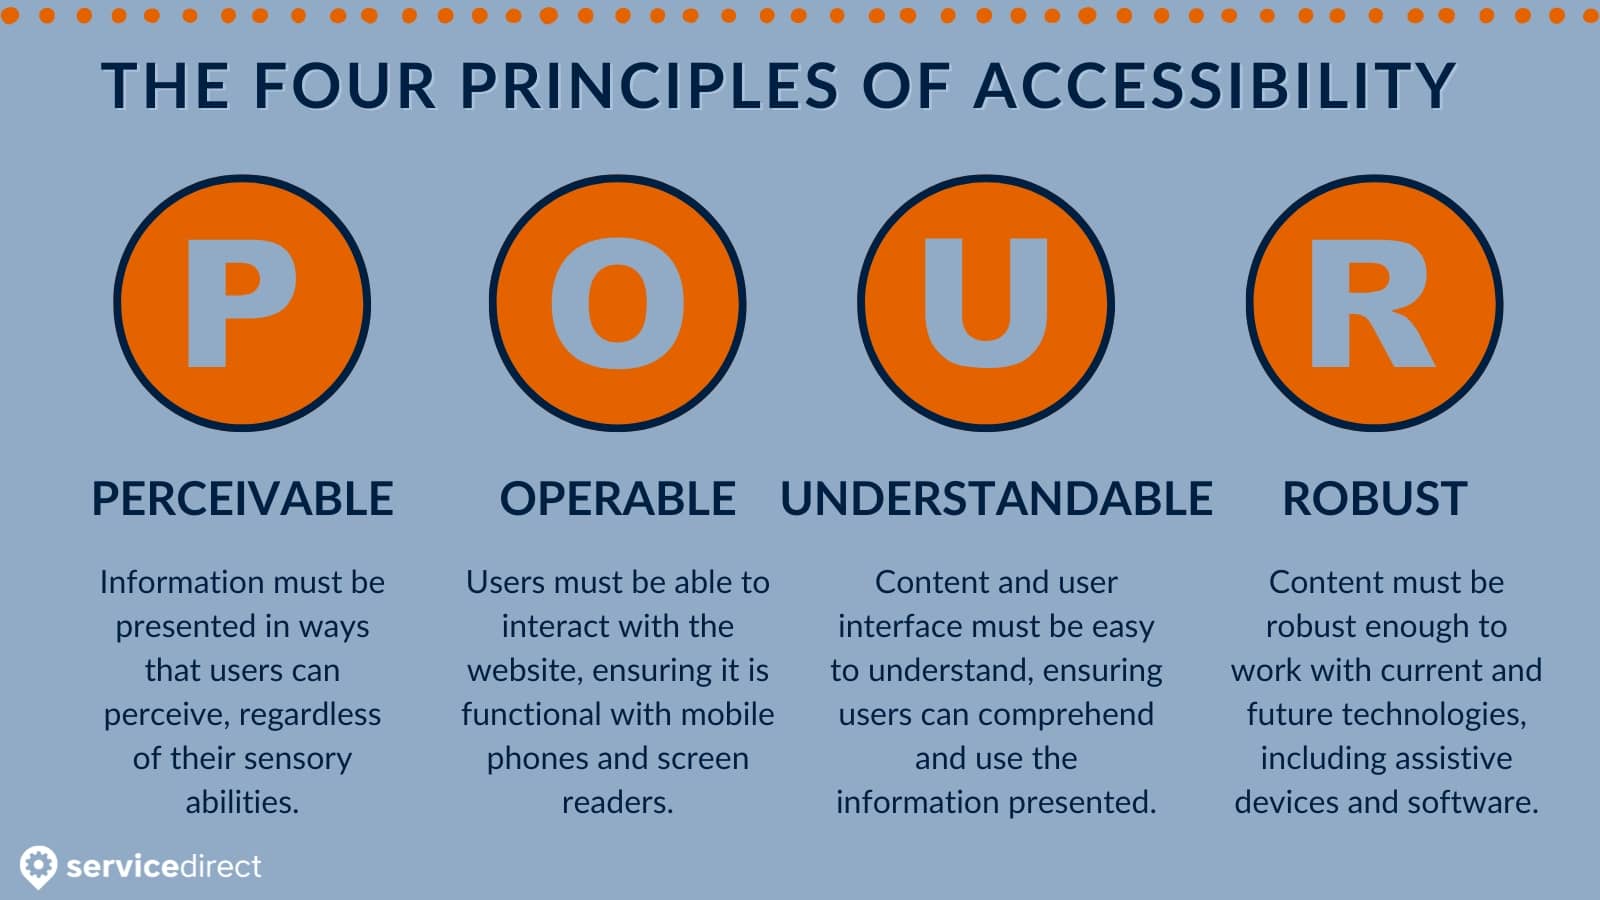 The four principles of accessibility